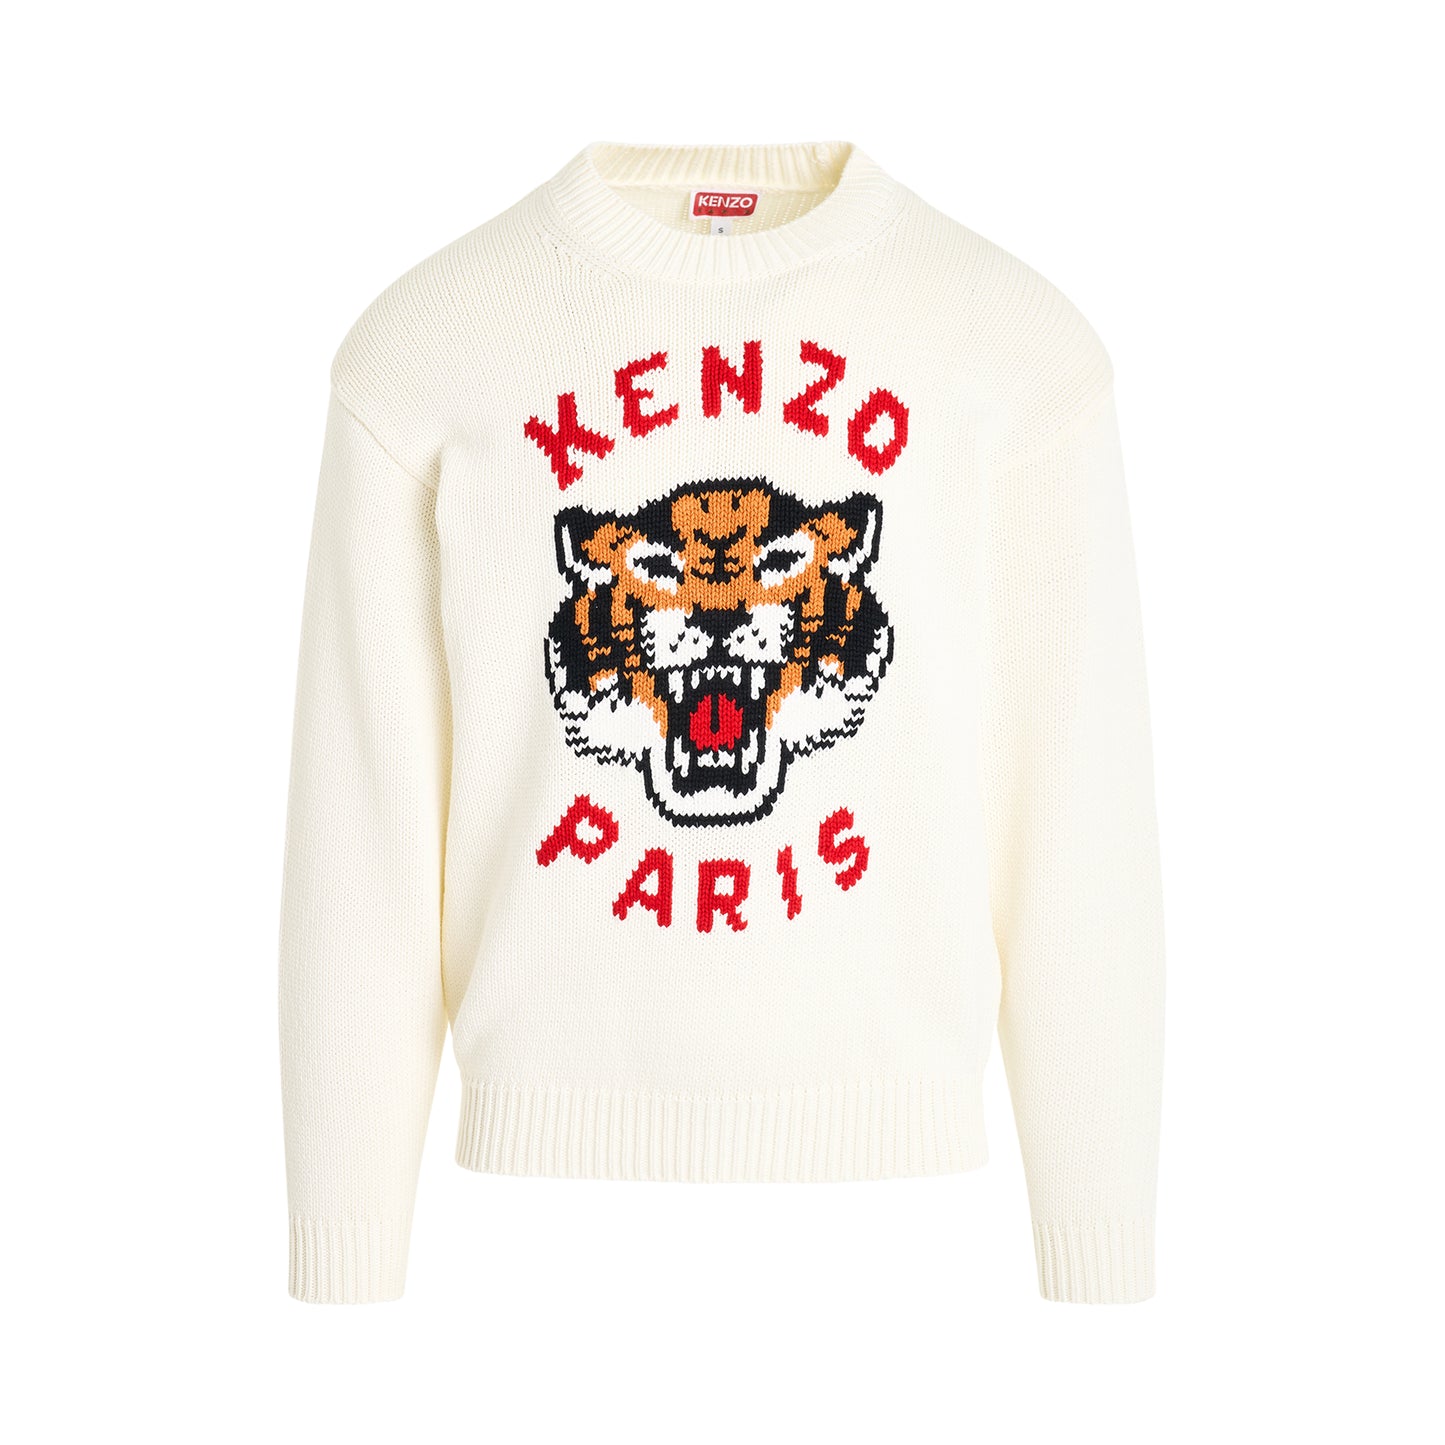 Kenzo Lucky Tiger Knit Sweater in Off White